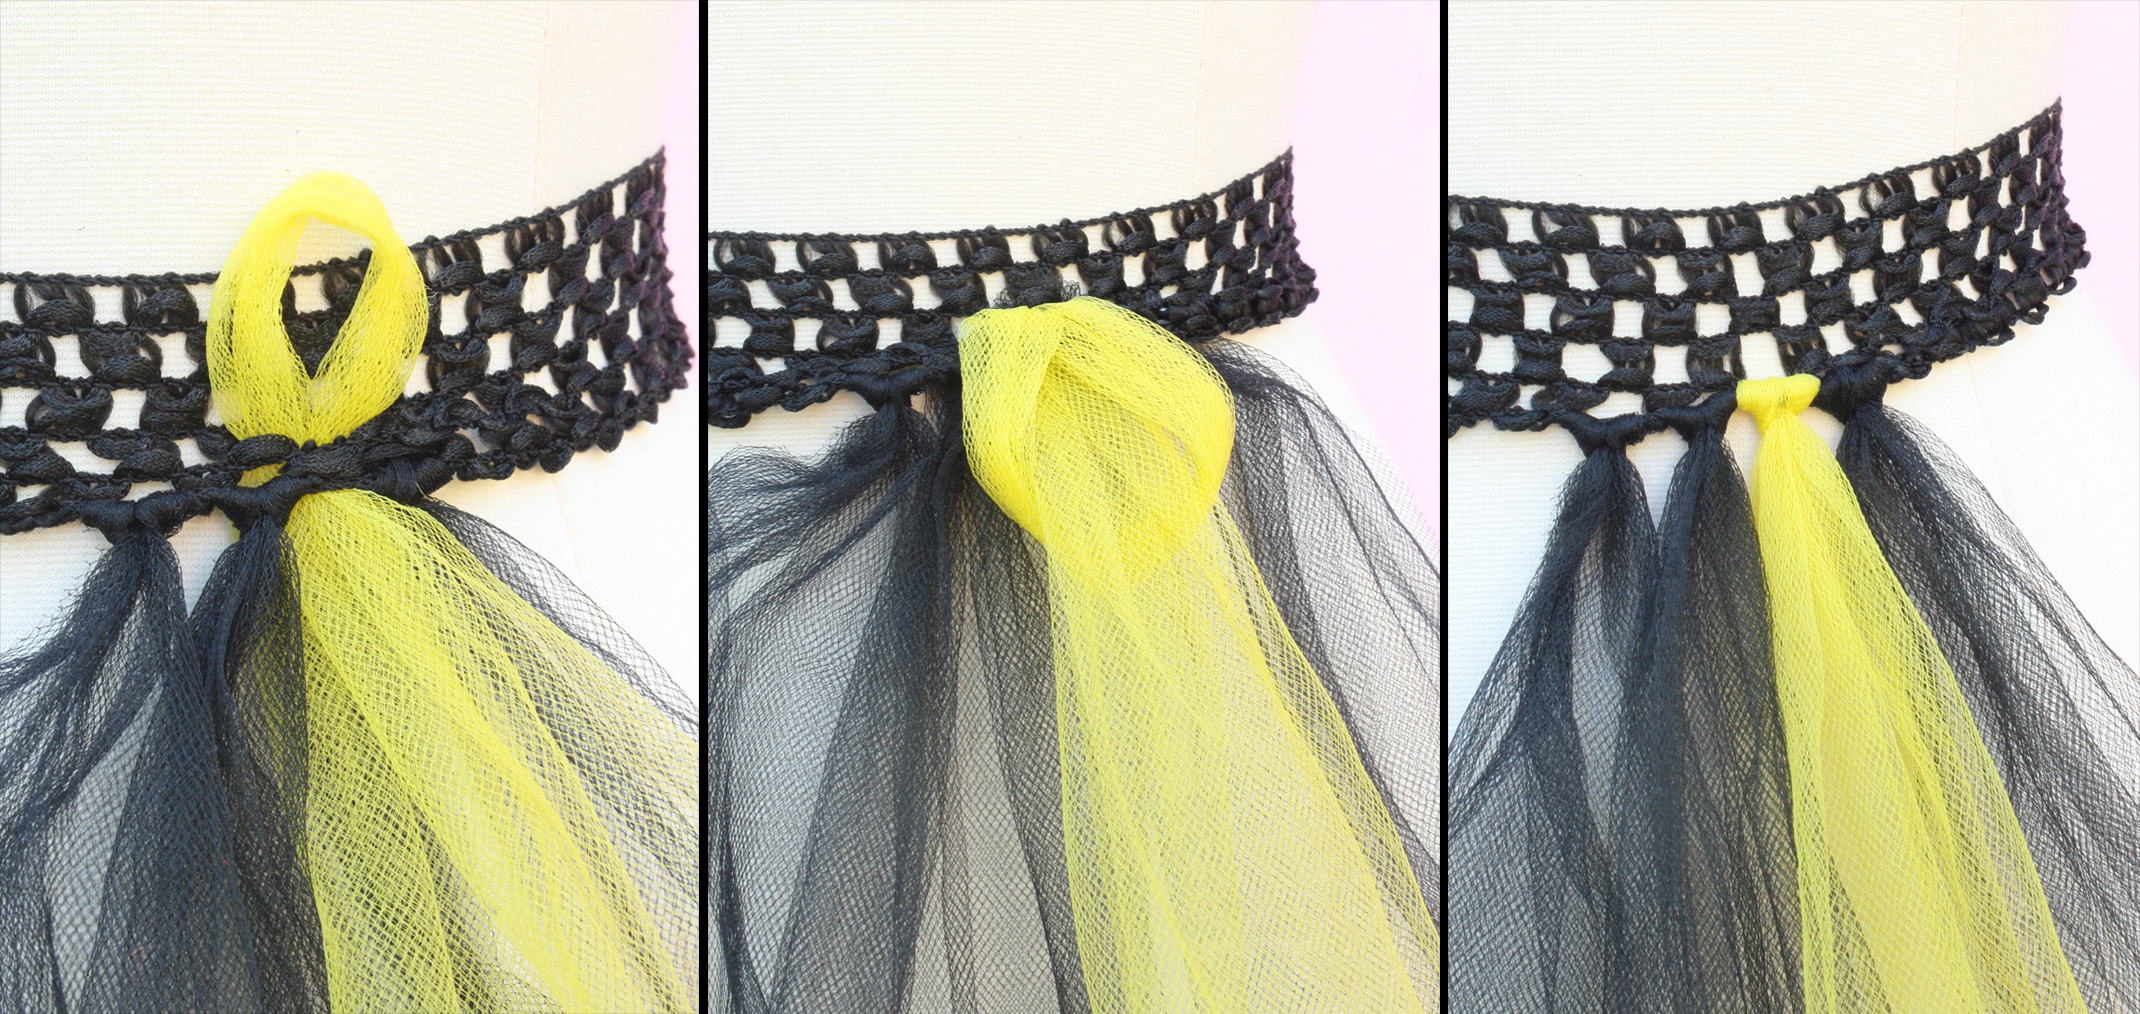 Bumble Bee Costume - How to make a Bumble Bee Tulle skirt - www.MeandAnnabelLee.com